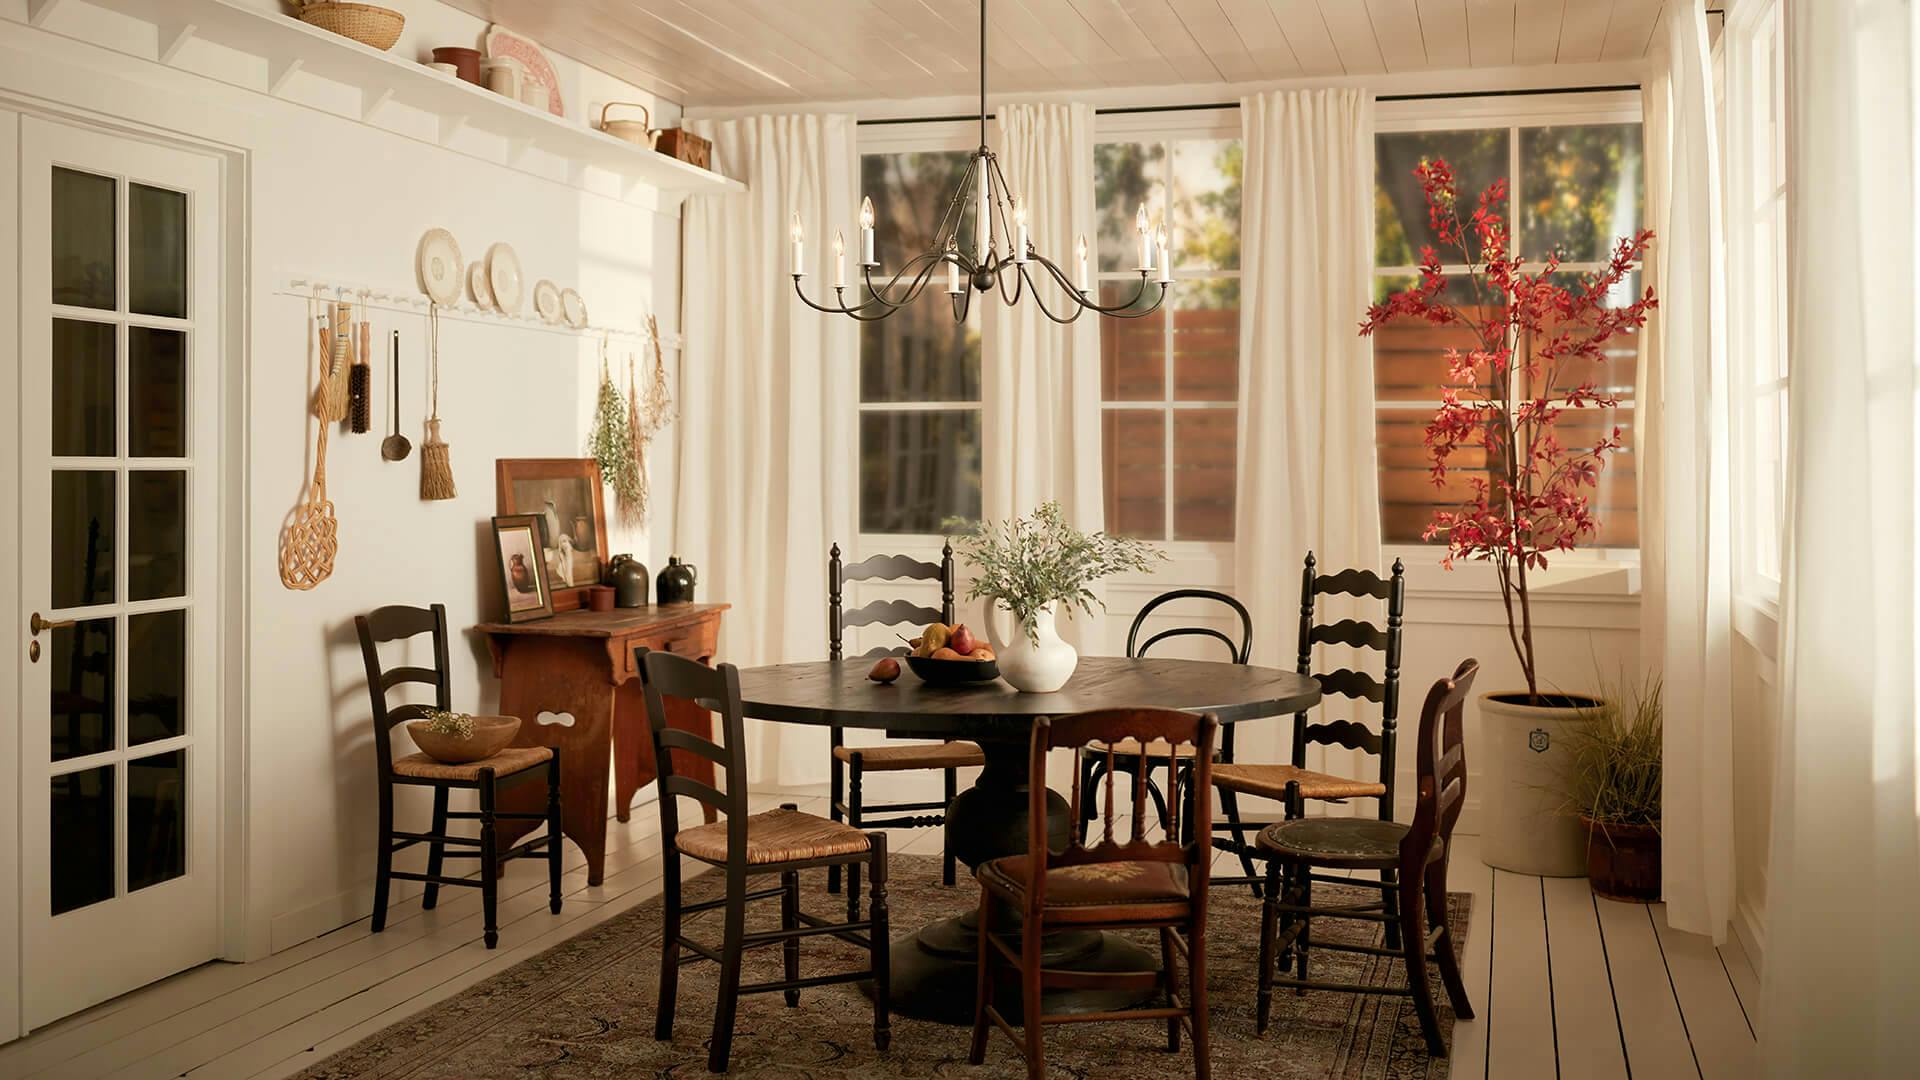 Rustic dining room, white walls with a black table with ladderback chairs featuring a Freesia chandelier